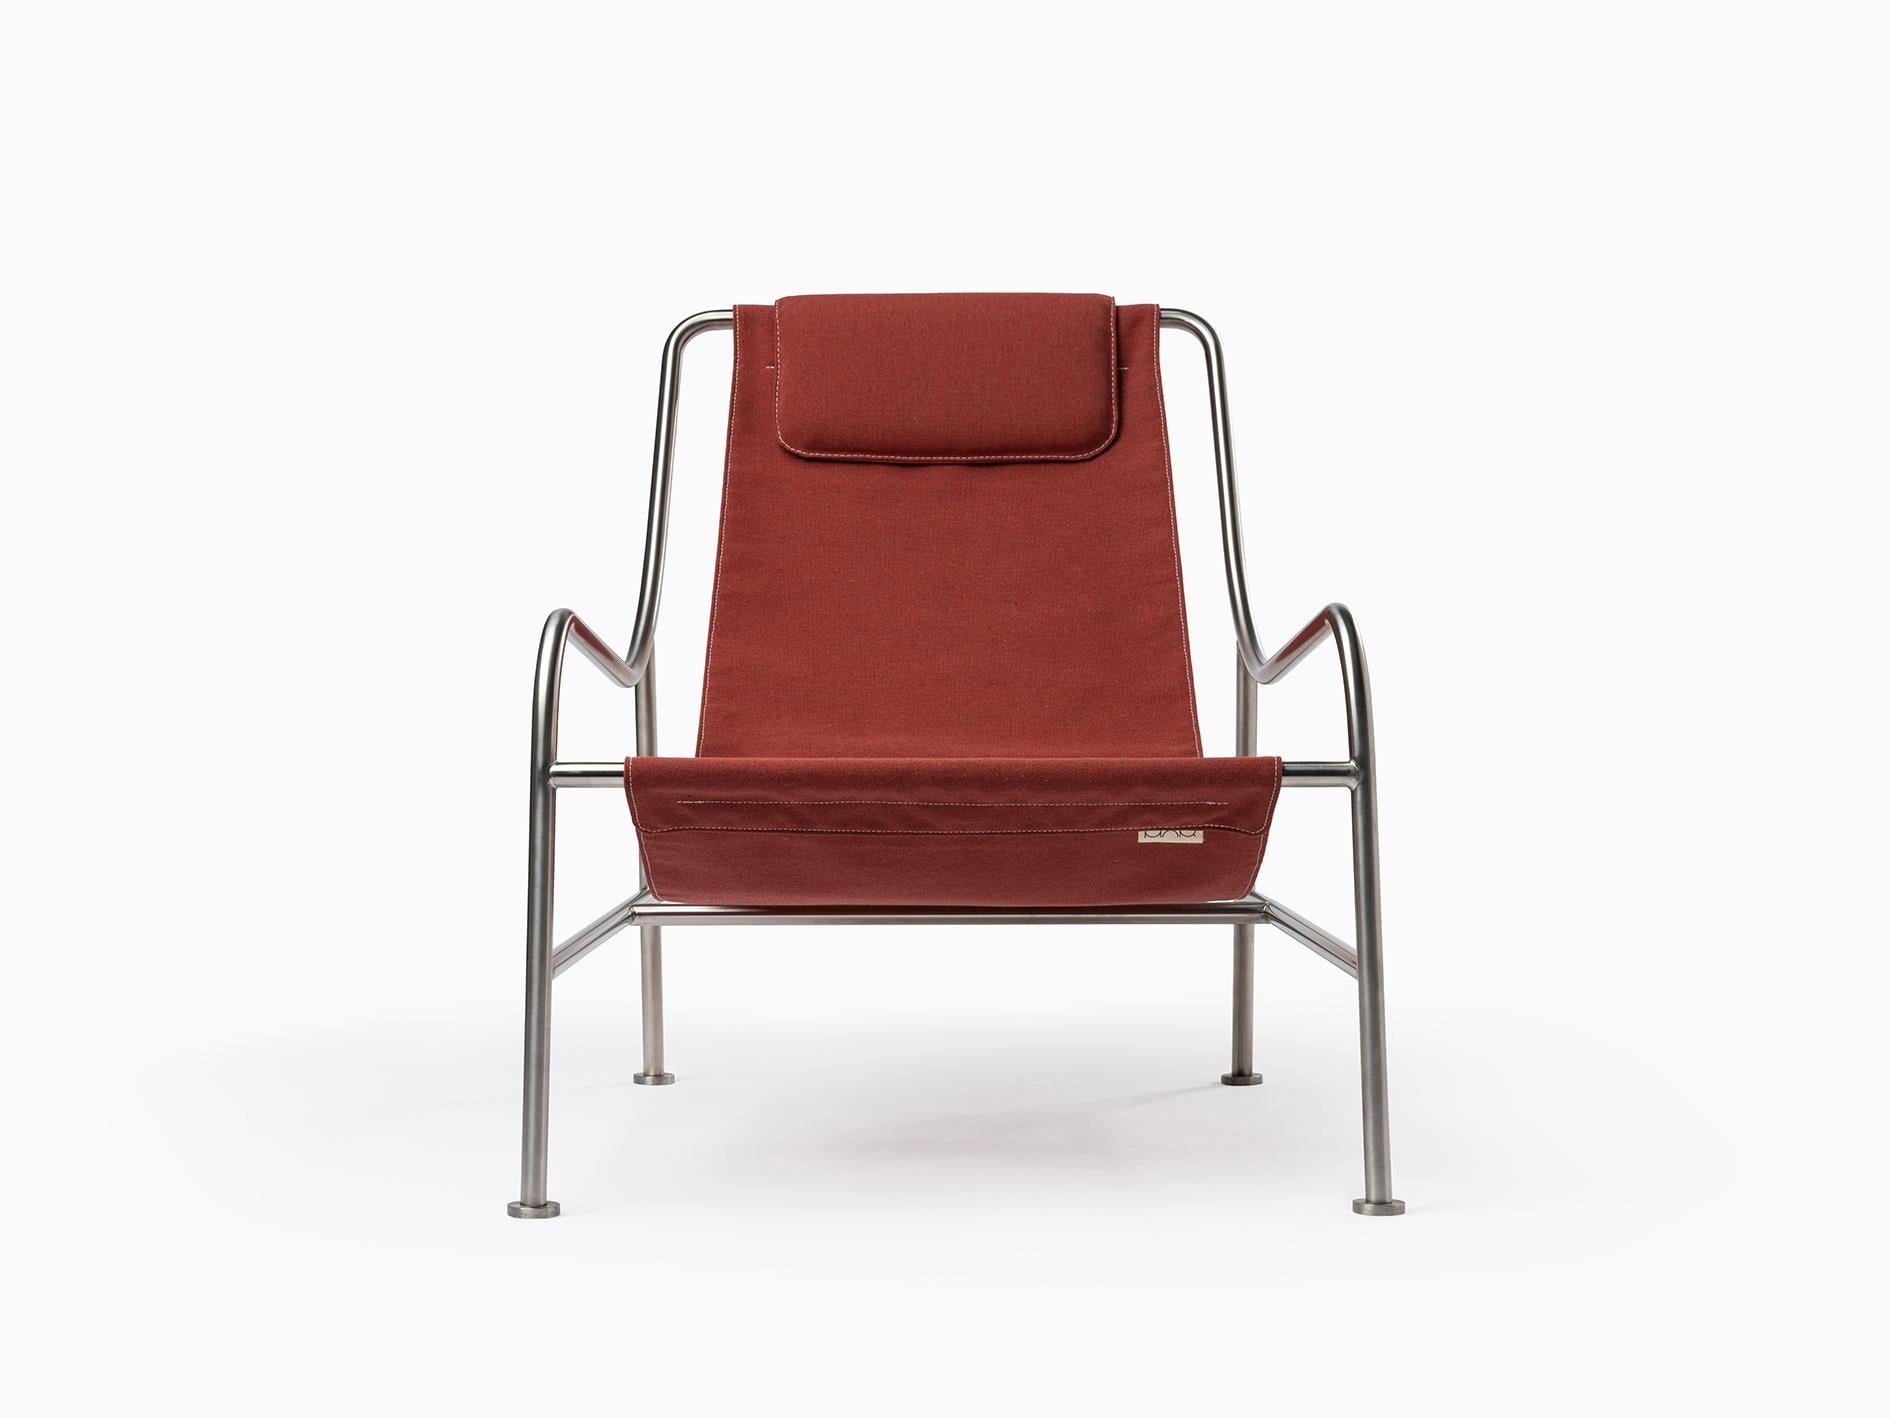 Hand-Crafted Minimalist Outdoor Lounge Chair in 